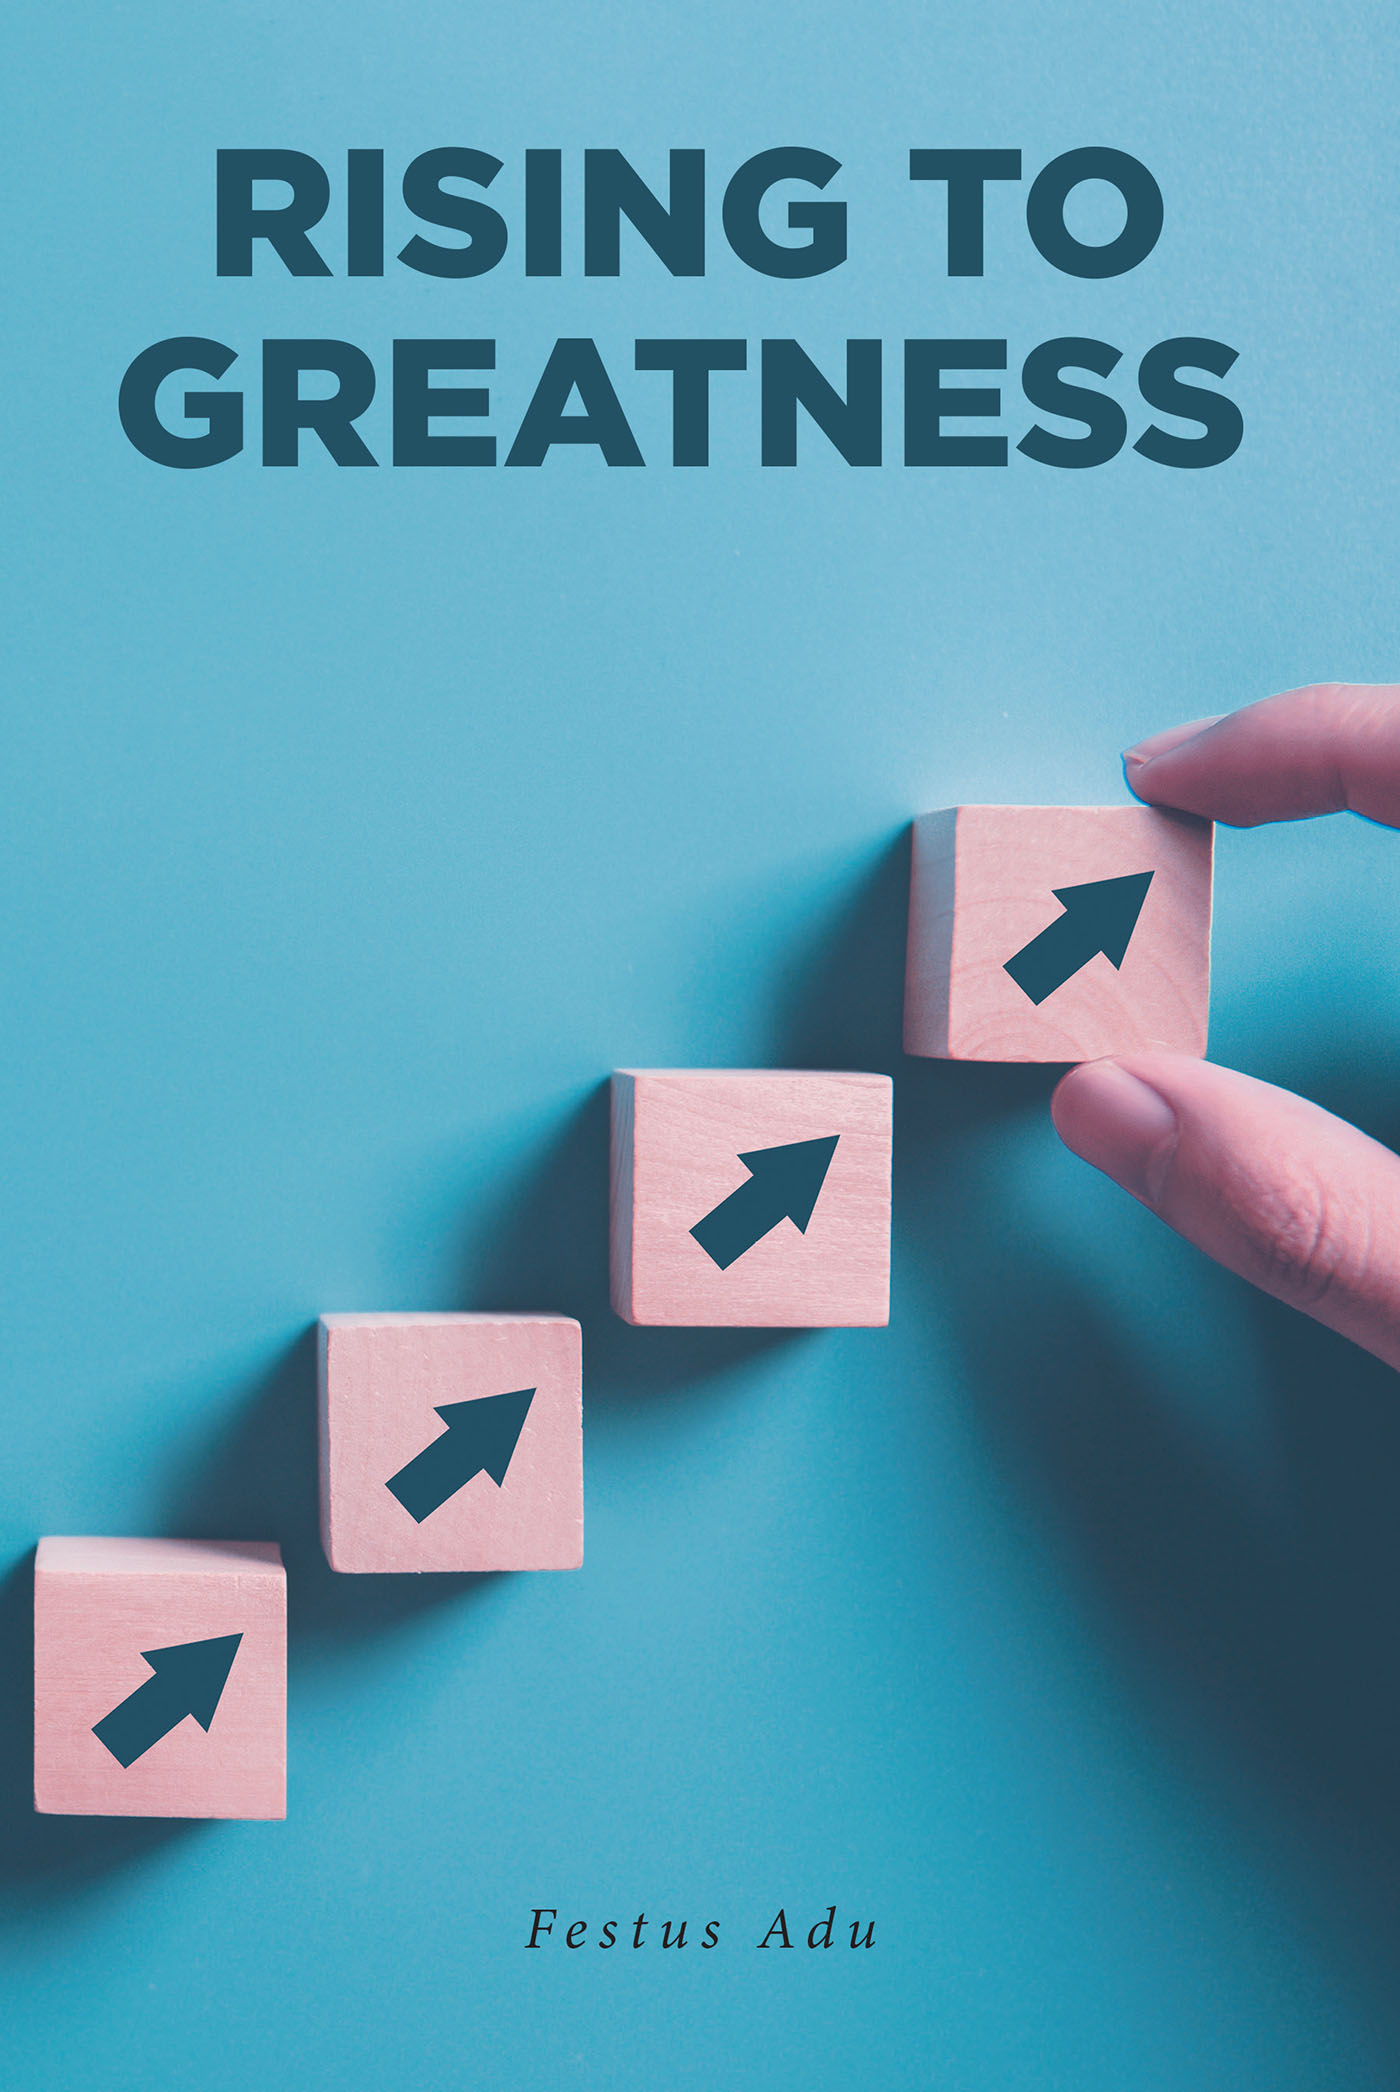 Festus Adu’s New Book, "Rising to Greatness," Follows a Young Boy Named Daani Whose Incredible Talents Help Him to Overcome His Life of Poverty to Find Success